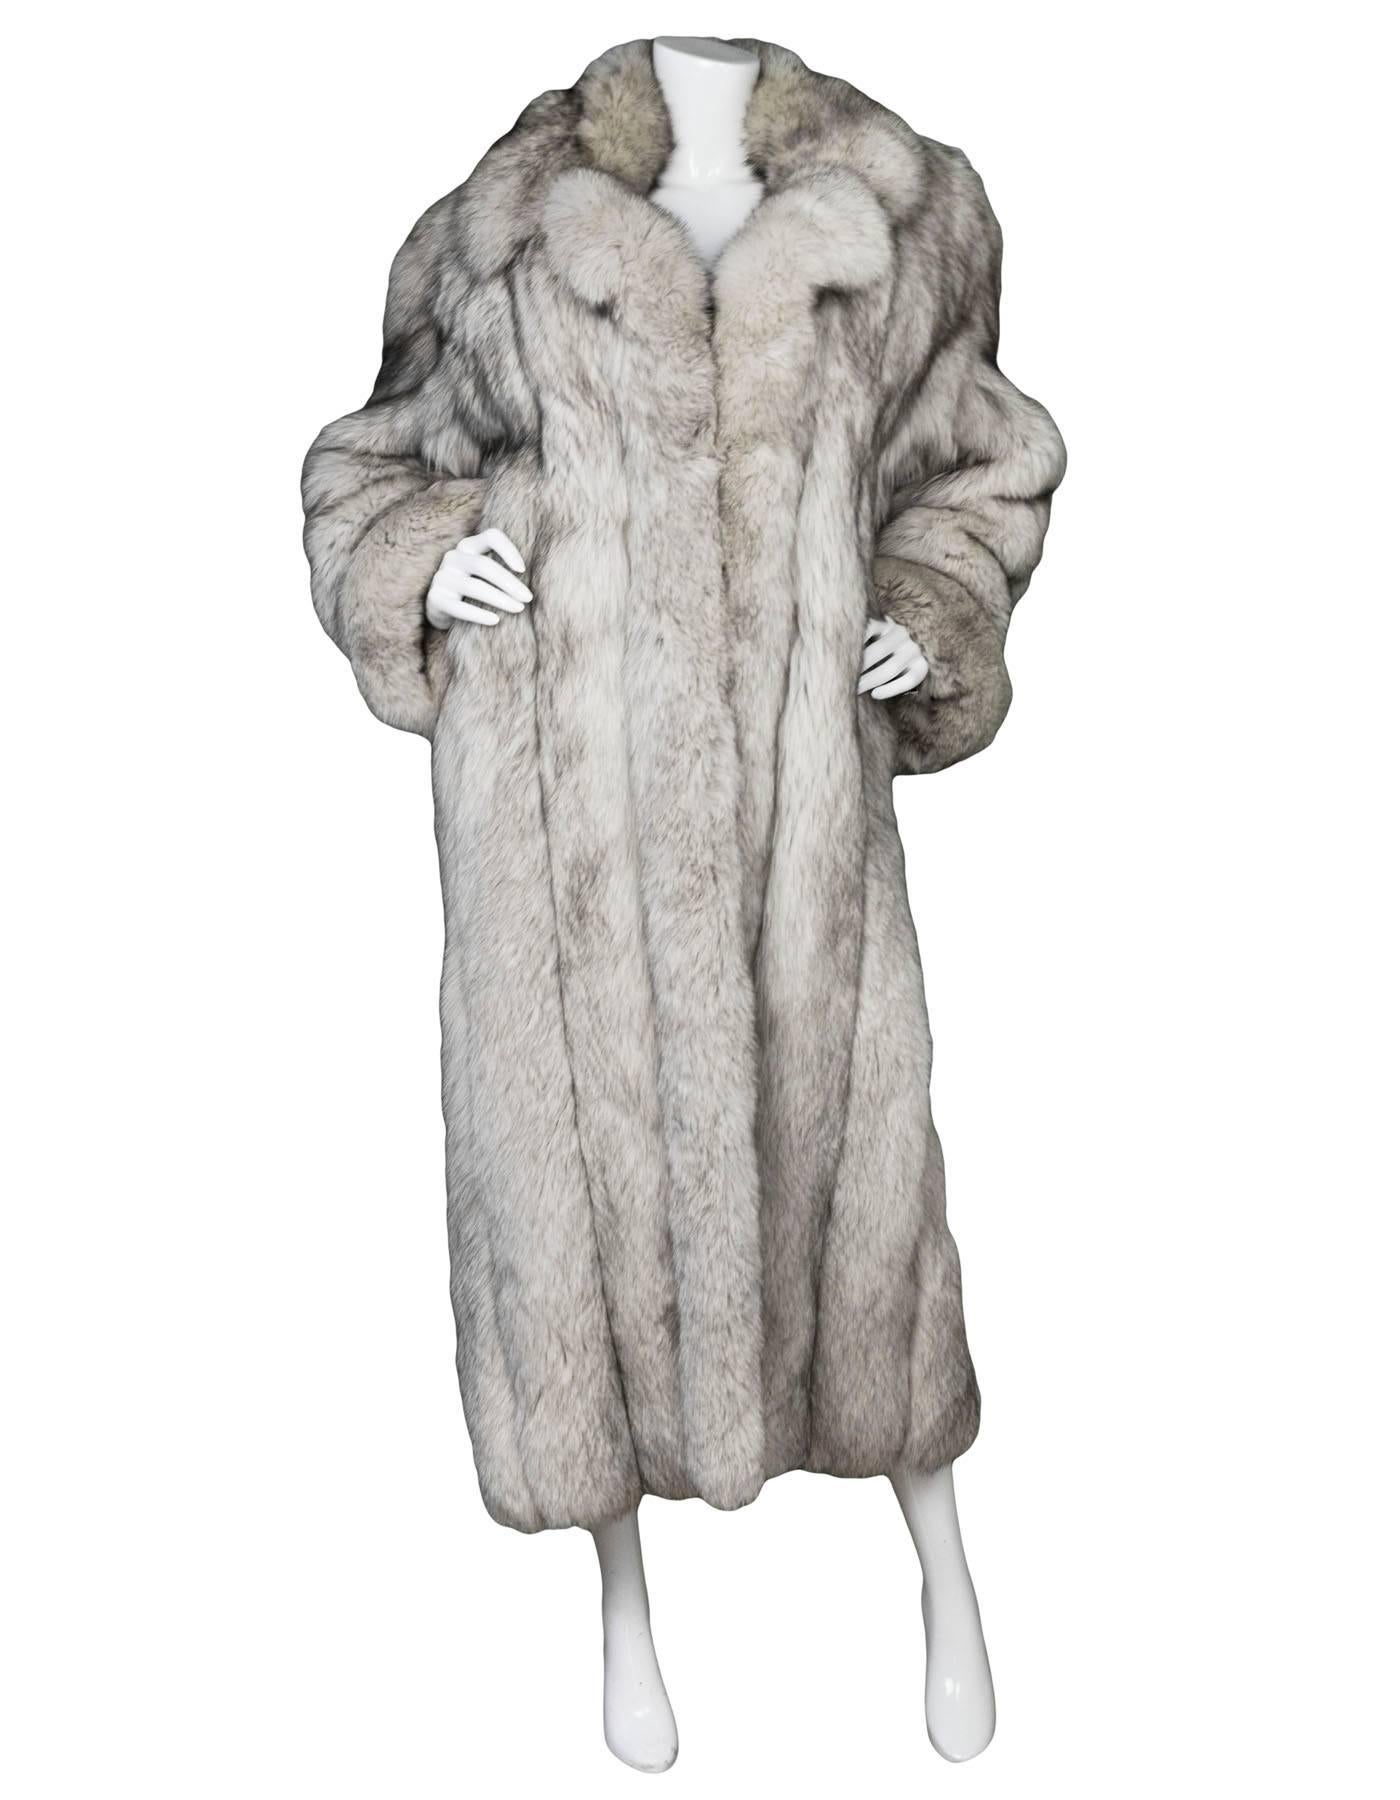 CD de Christian Dior Fourrures Silver Fox Fur Coat Sz L

Color: Black, white
Composition: Silver fox fur
Lining: Grey textile
Closure/Opening: Hook & eye at front
Exterior Pockets: Two hip pockets
Interior Pockets: One zip pocket
Overall